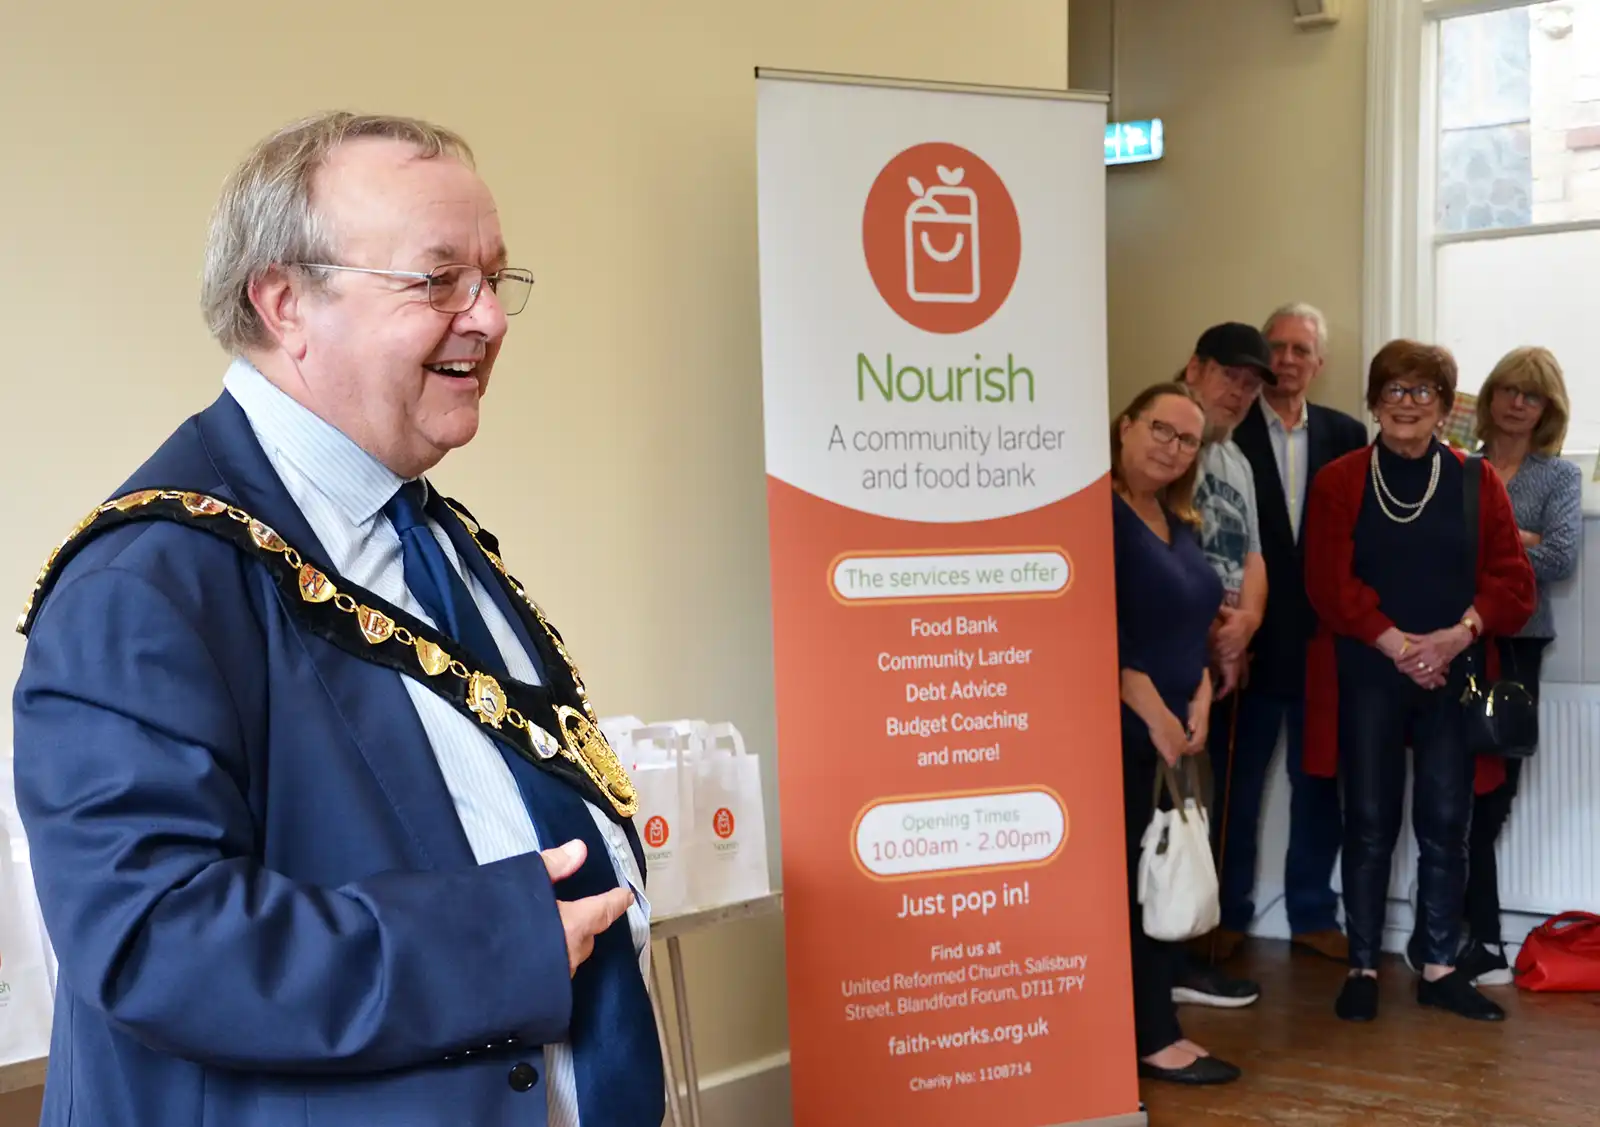 Mayor of Blandford, Cllr Hugo Mieville, officially launches Nourish